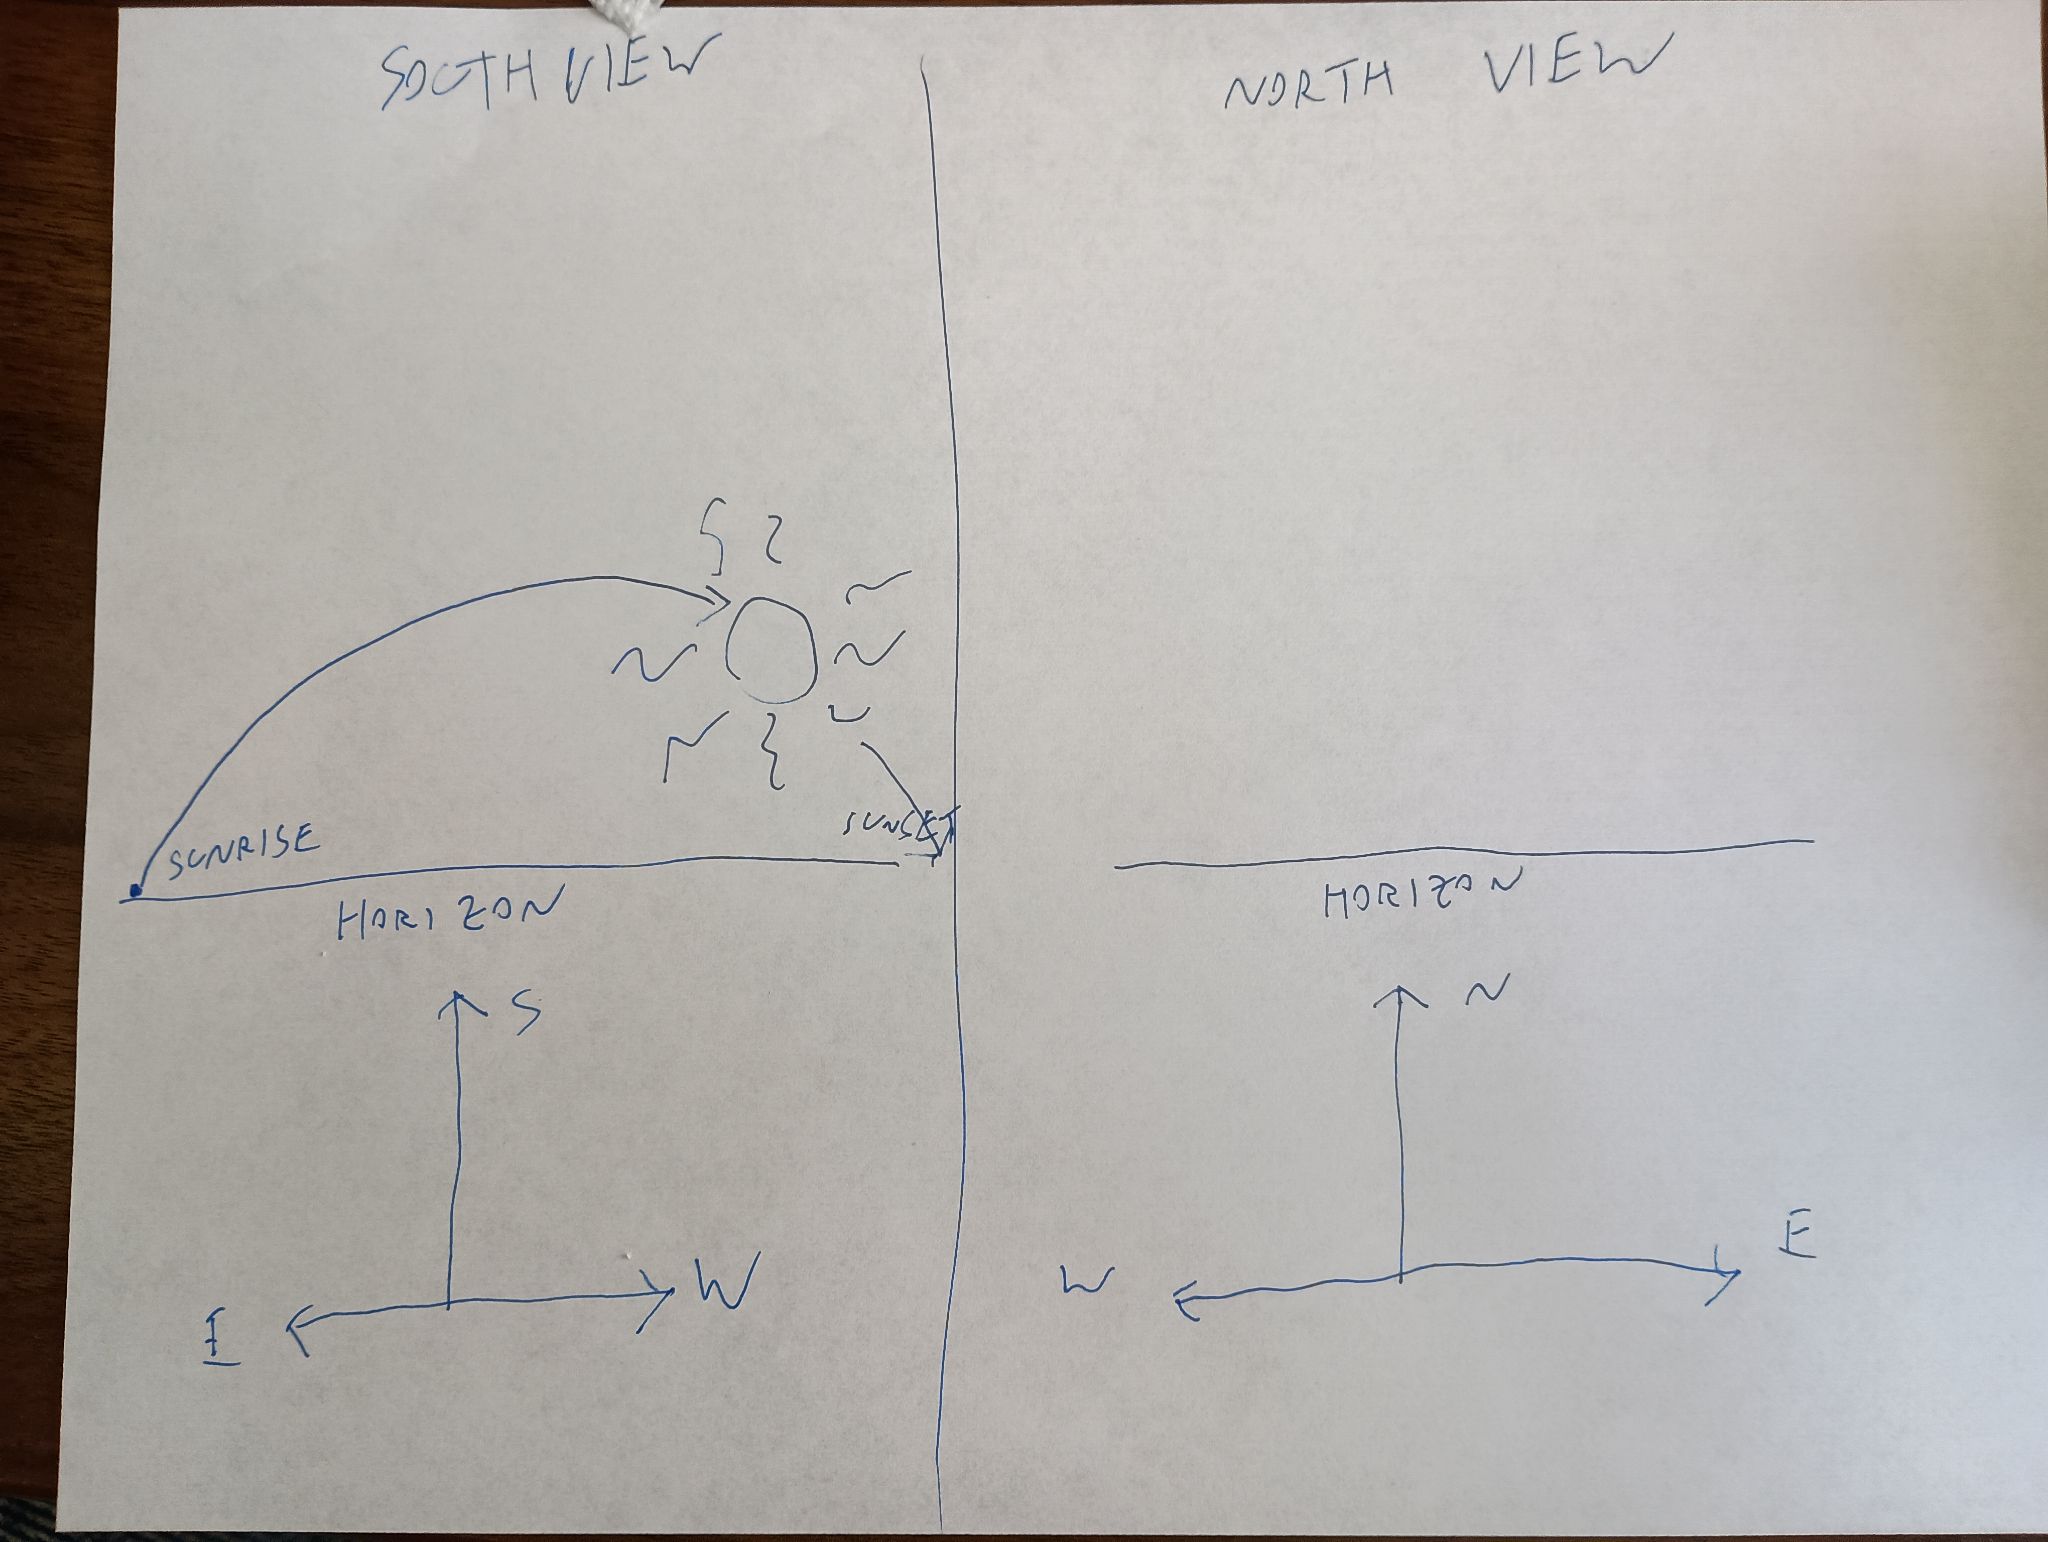 Two similar hand-drawn diagrams, side by side.  One, labeled ‘SOUTH VIEW’, shows the sun coming up from a point at the left (east) end of the horizon labeled ‘sunrise’, passing upward in a circular arc, then down to a point on the right (west) labeled ‘sunset’.  The other diagram, labeled ‘NORTH VIEW’, shows the same horizon, but no sun, no arc, and no sunrise or sunset.